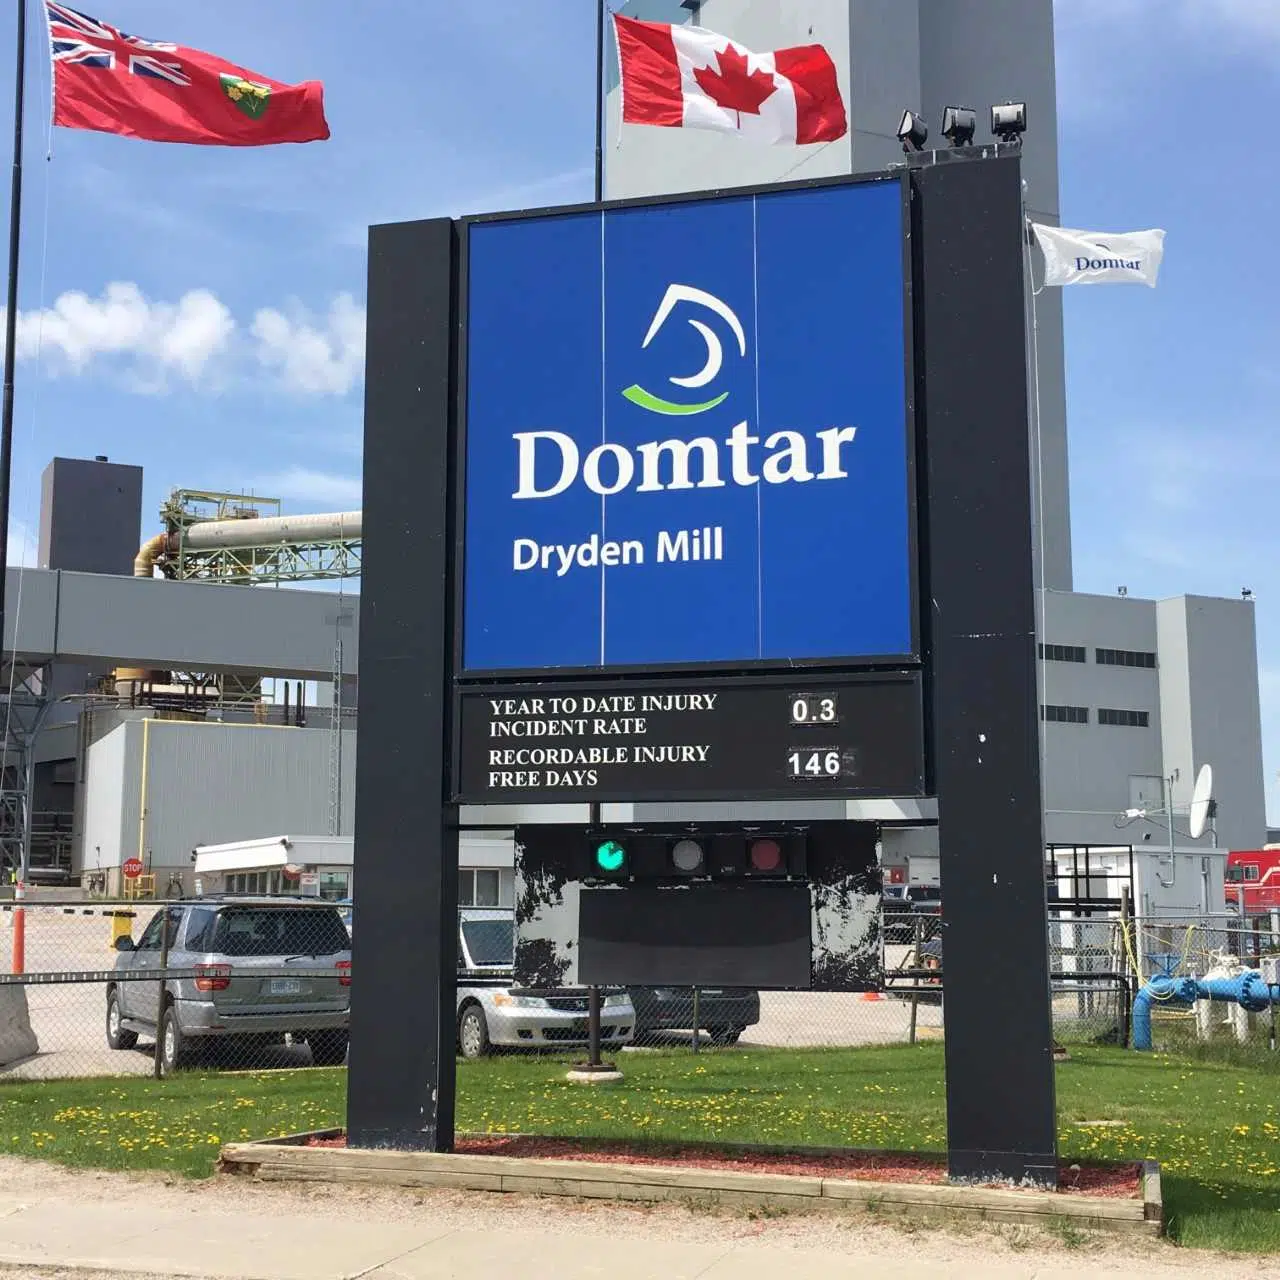 Domtar donates $55,000 to community ahead of mill sale